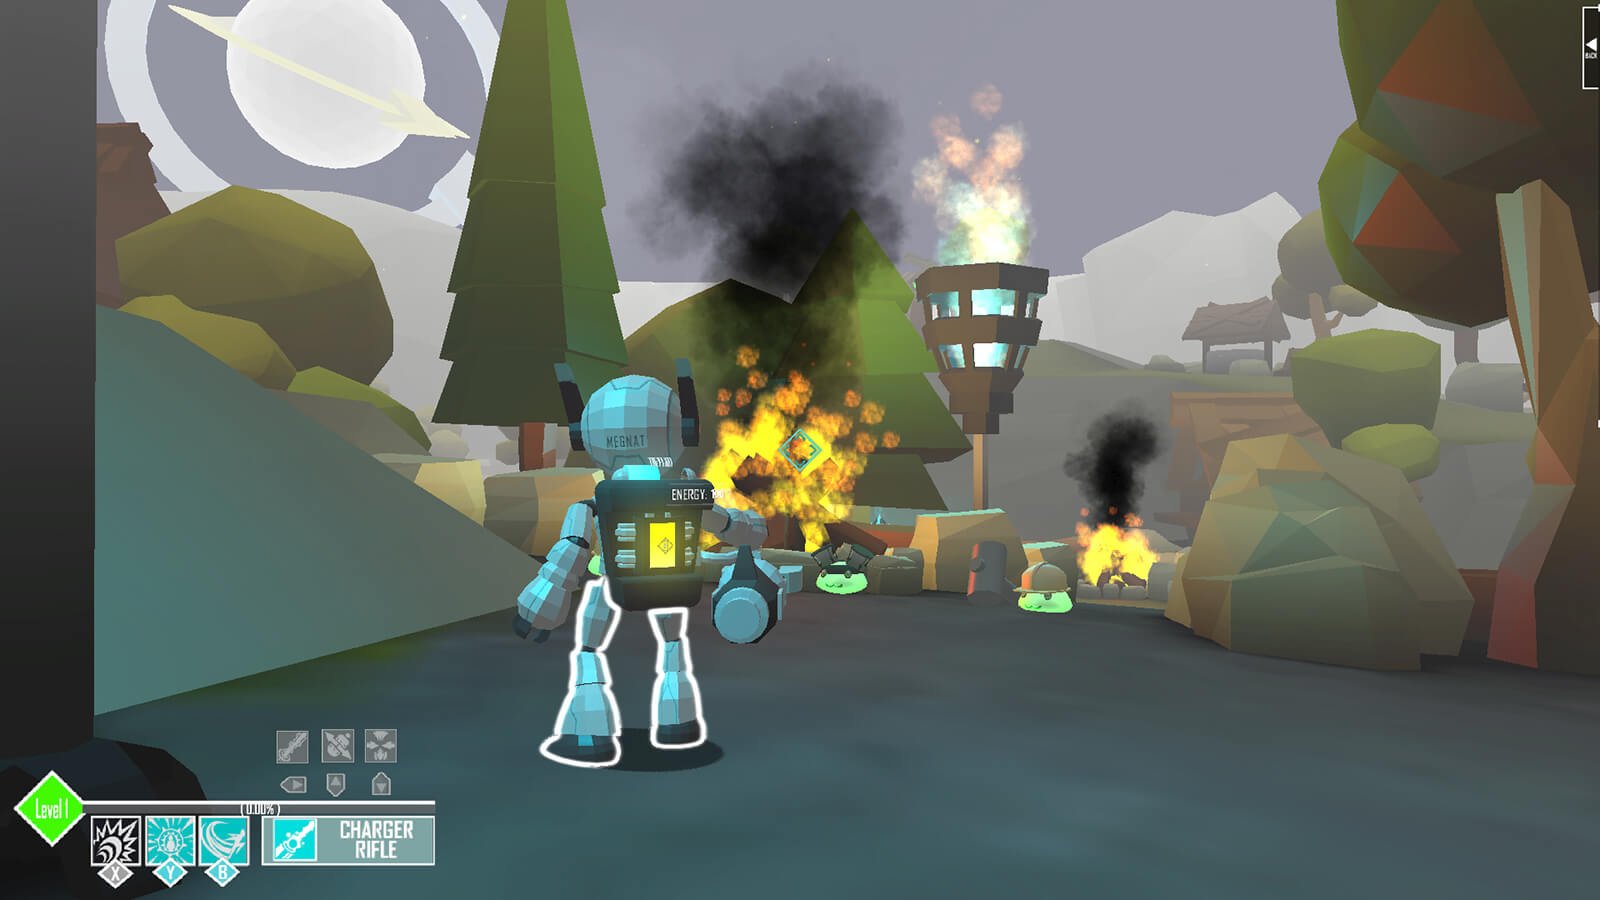 A robot seen from behind confronting short green blobs of slime in a forested area with smoke and flames appearing ahead.